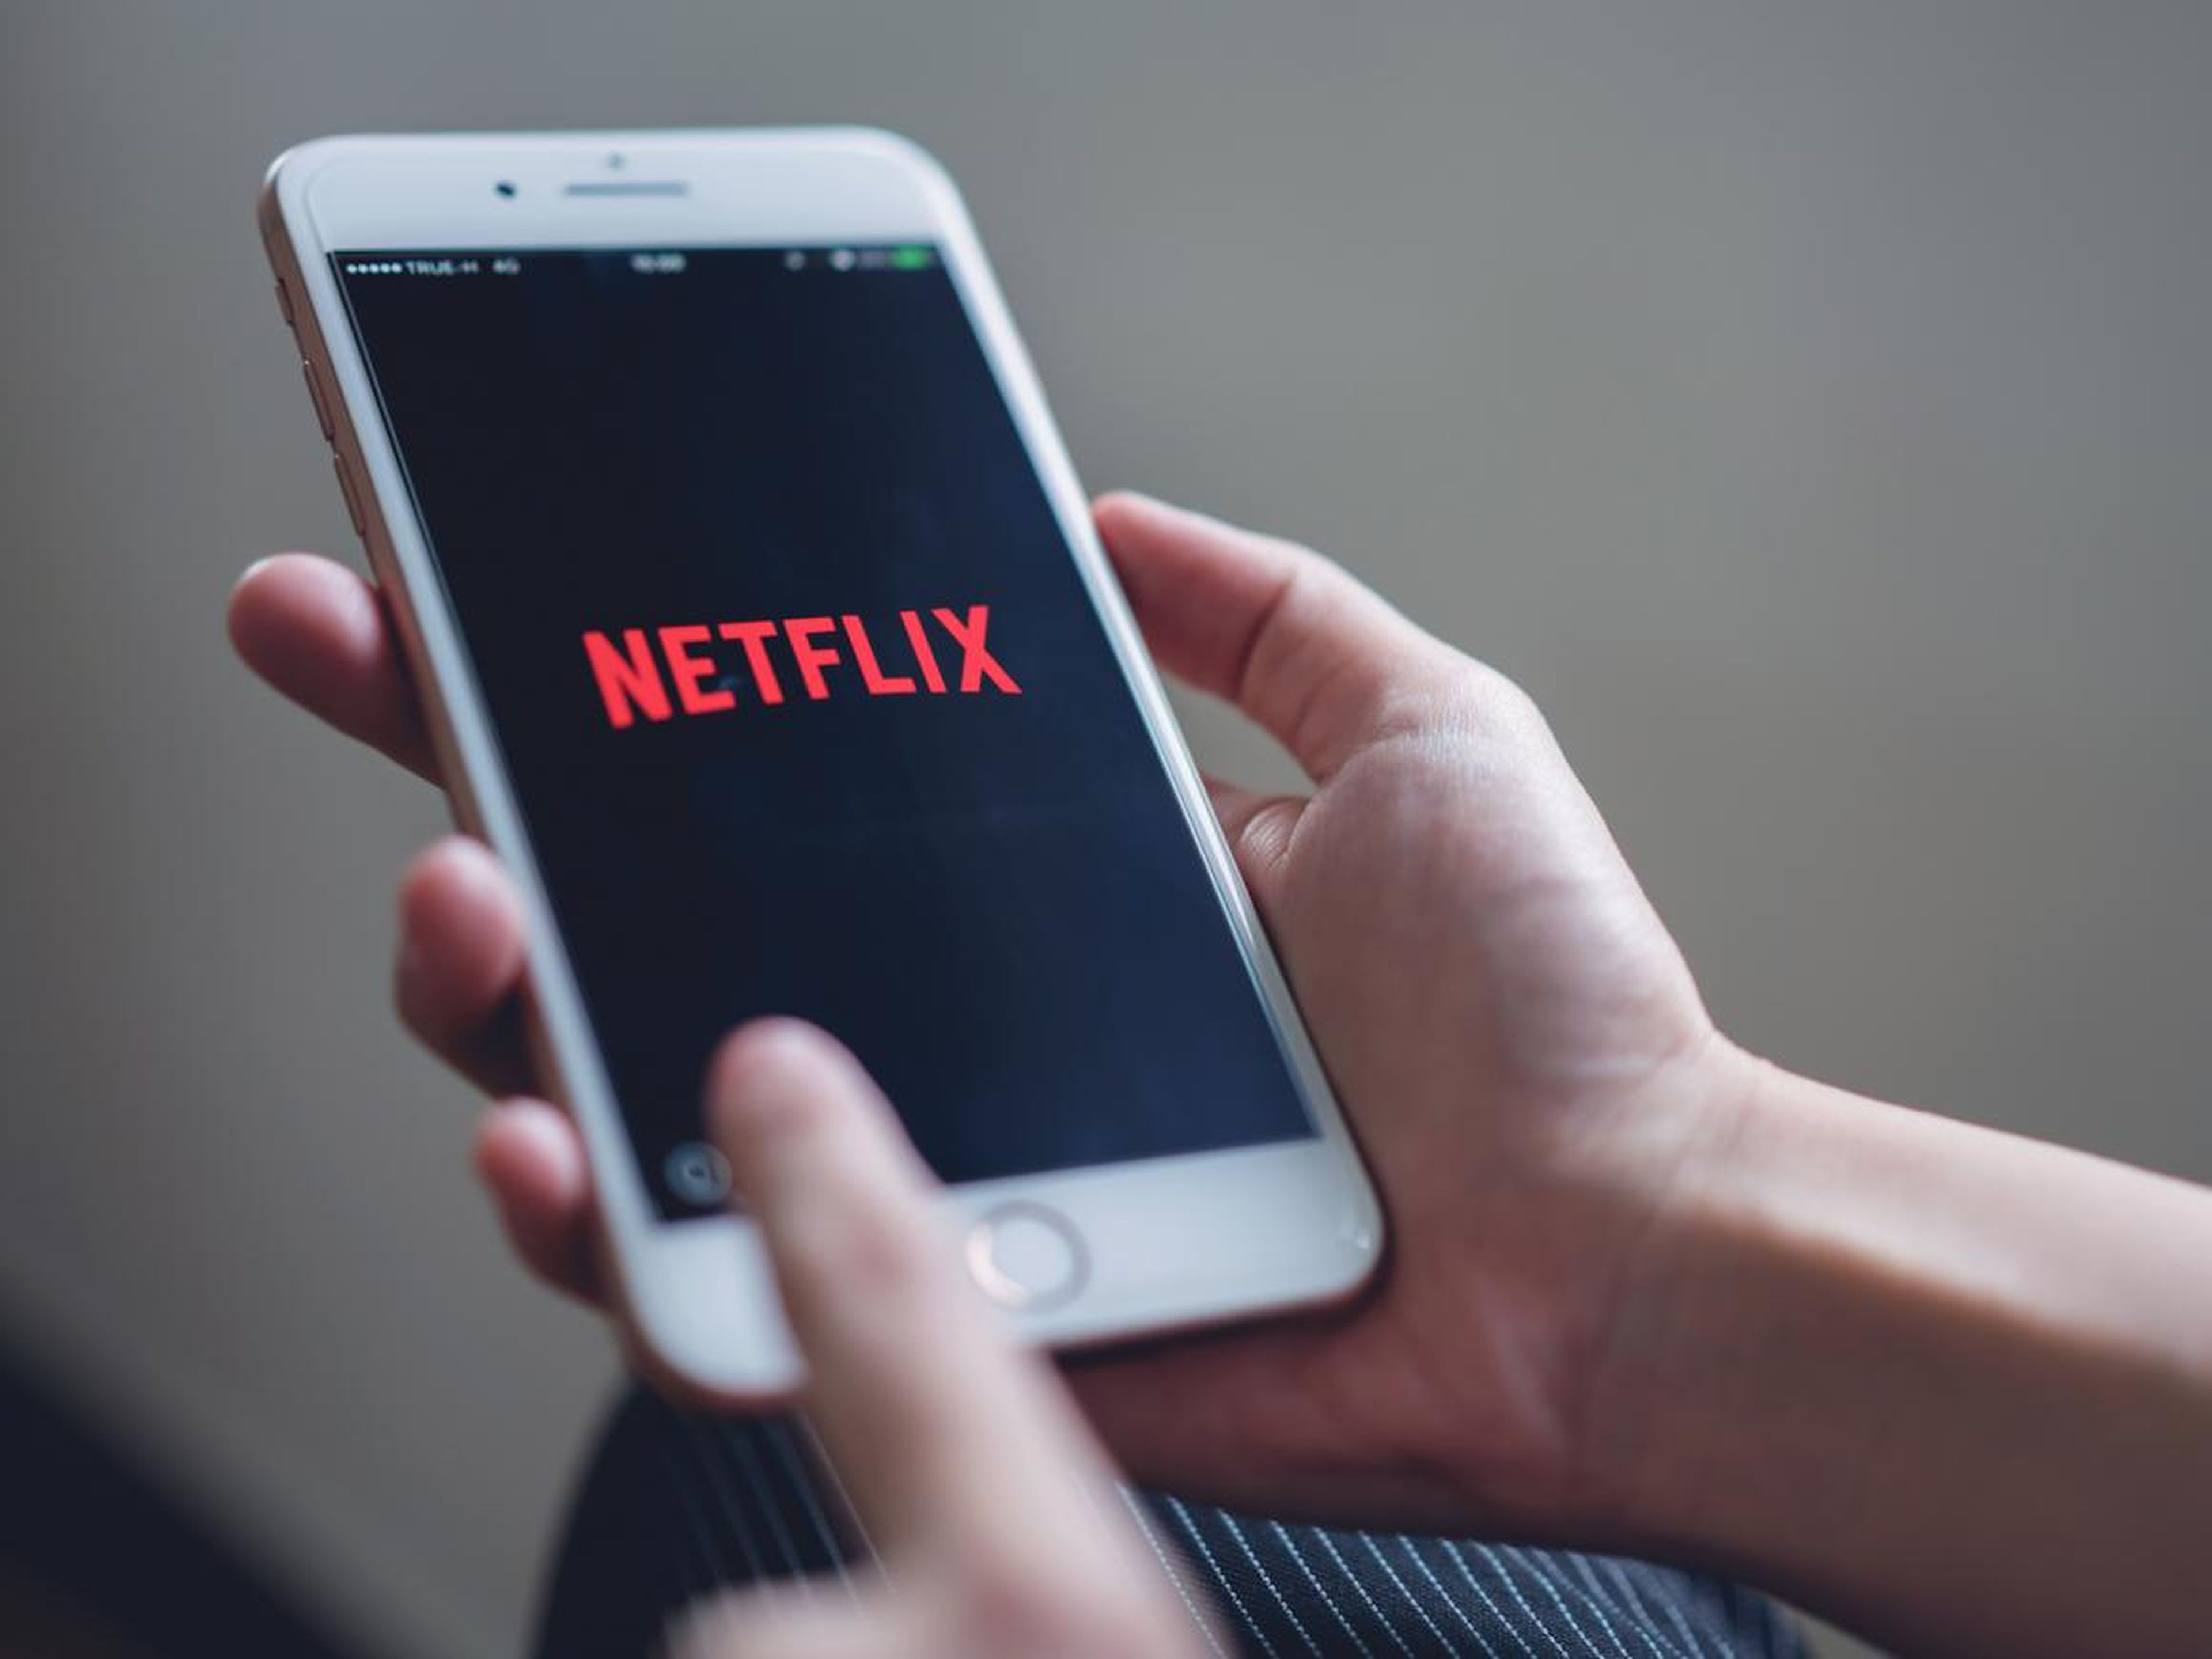 People wanted to know whether Netflix employees could binge-watch shows at work.